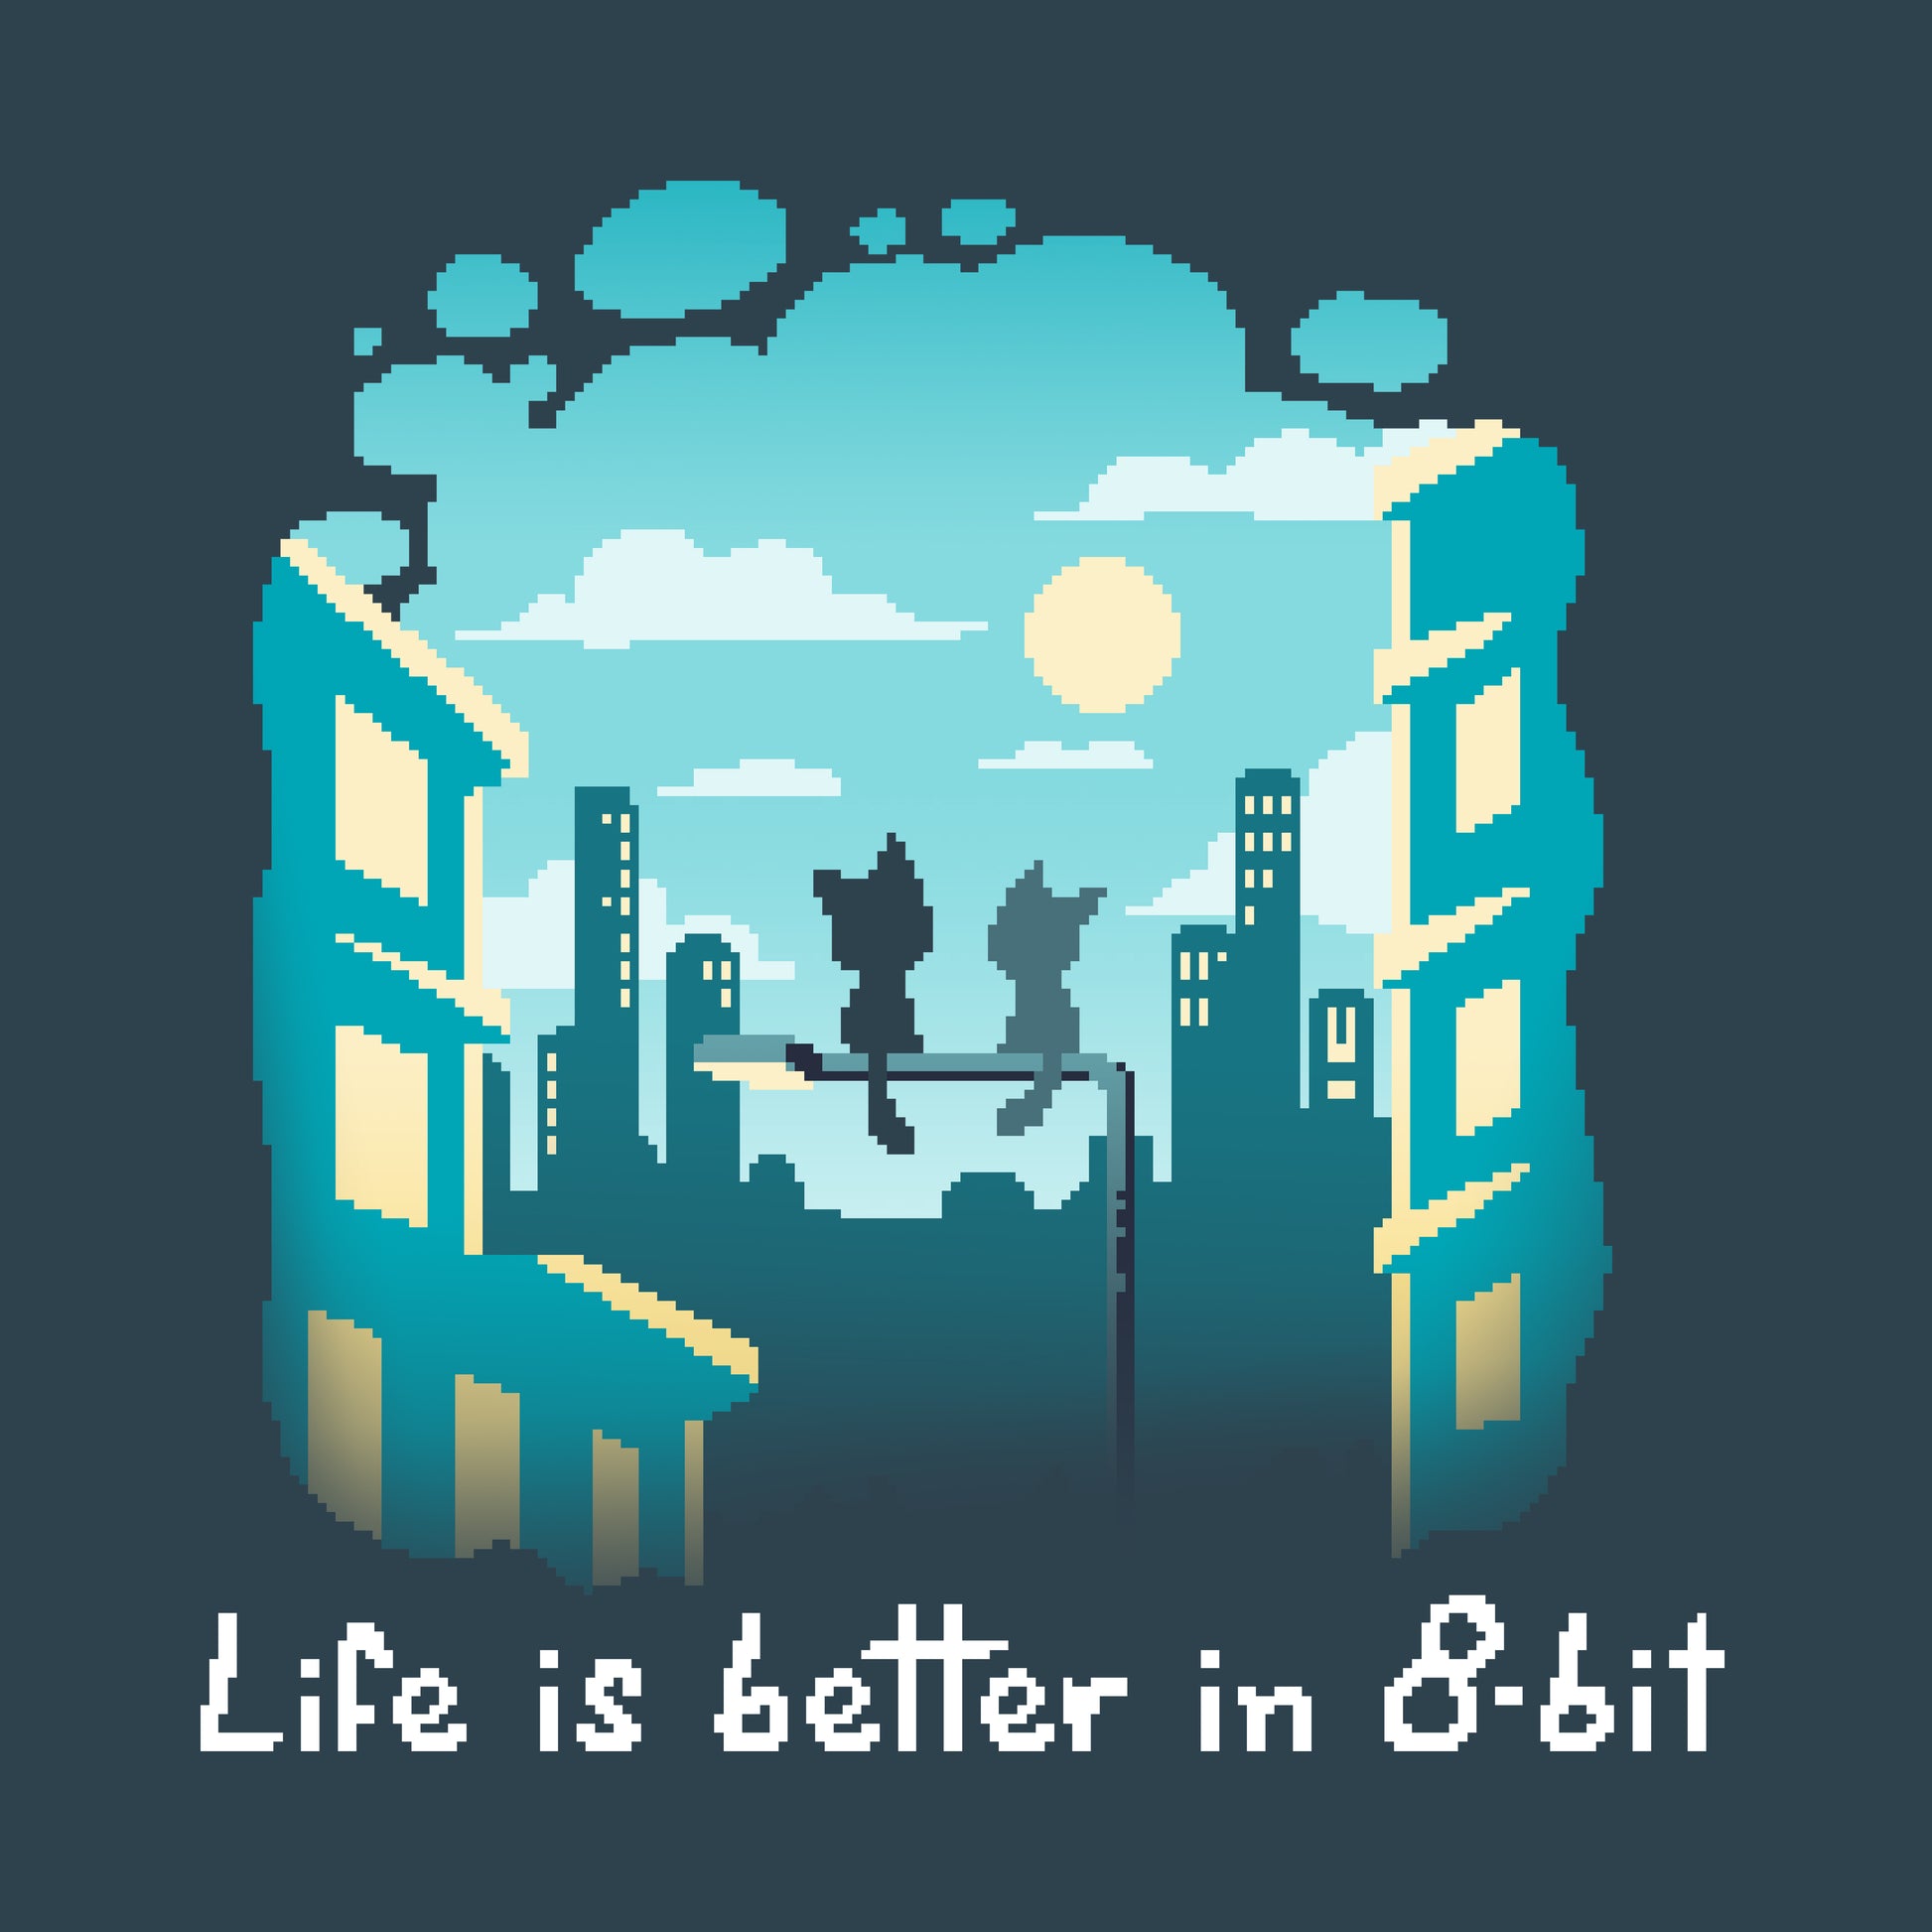 Get ready to level up your style with the "Life Is Better in 8-Bit" T-shirt by TeeTurtle. Made from premium ringspun cotton, this shirt embodies the nostalgic charm of retro gaming while providing all-day comfort.